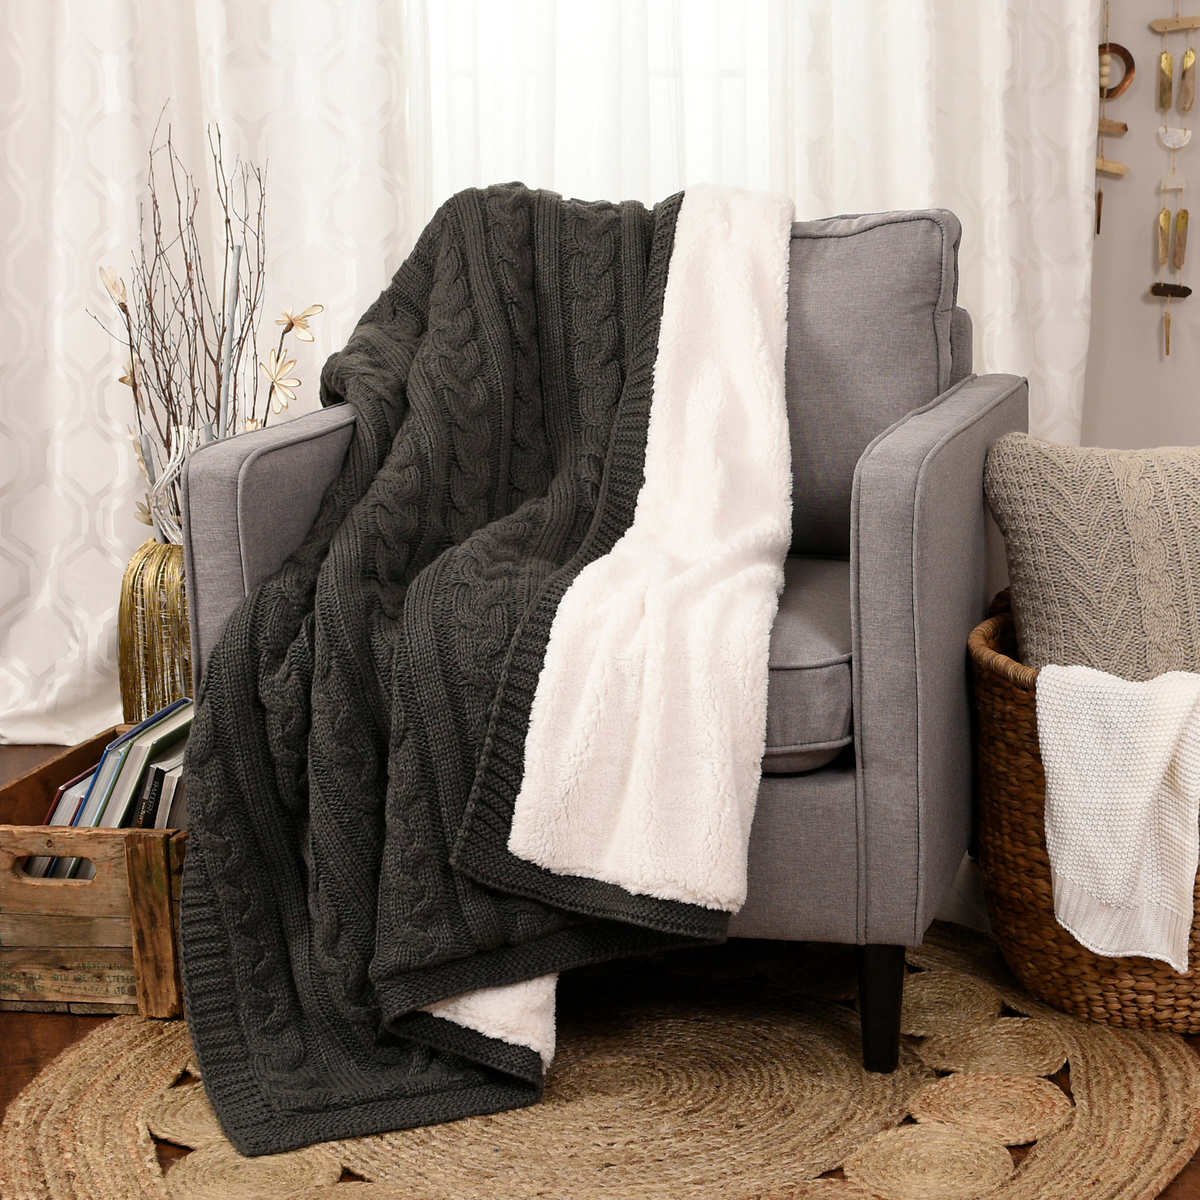 Life Comfort Cable Knit Sherpa Throw Reversible Warm Cozy Blanket 50" x 60"